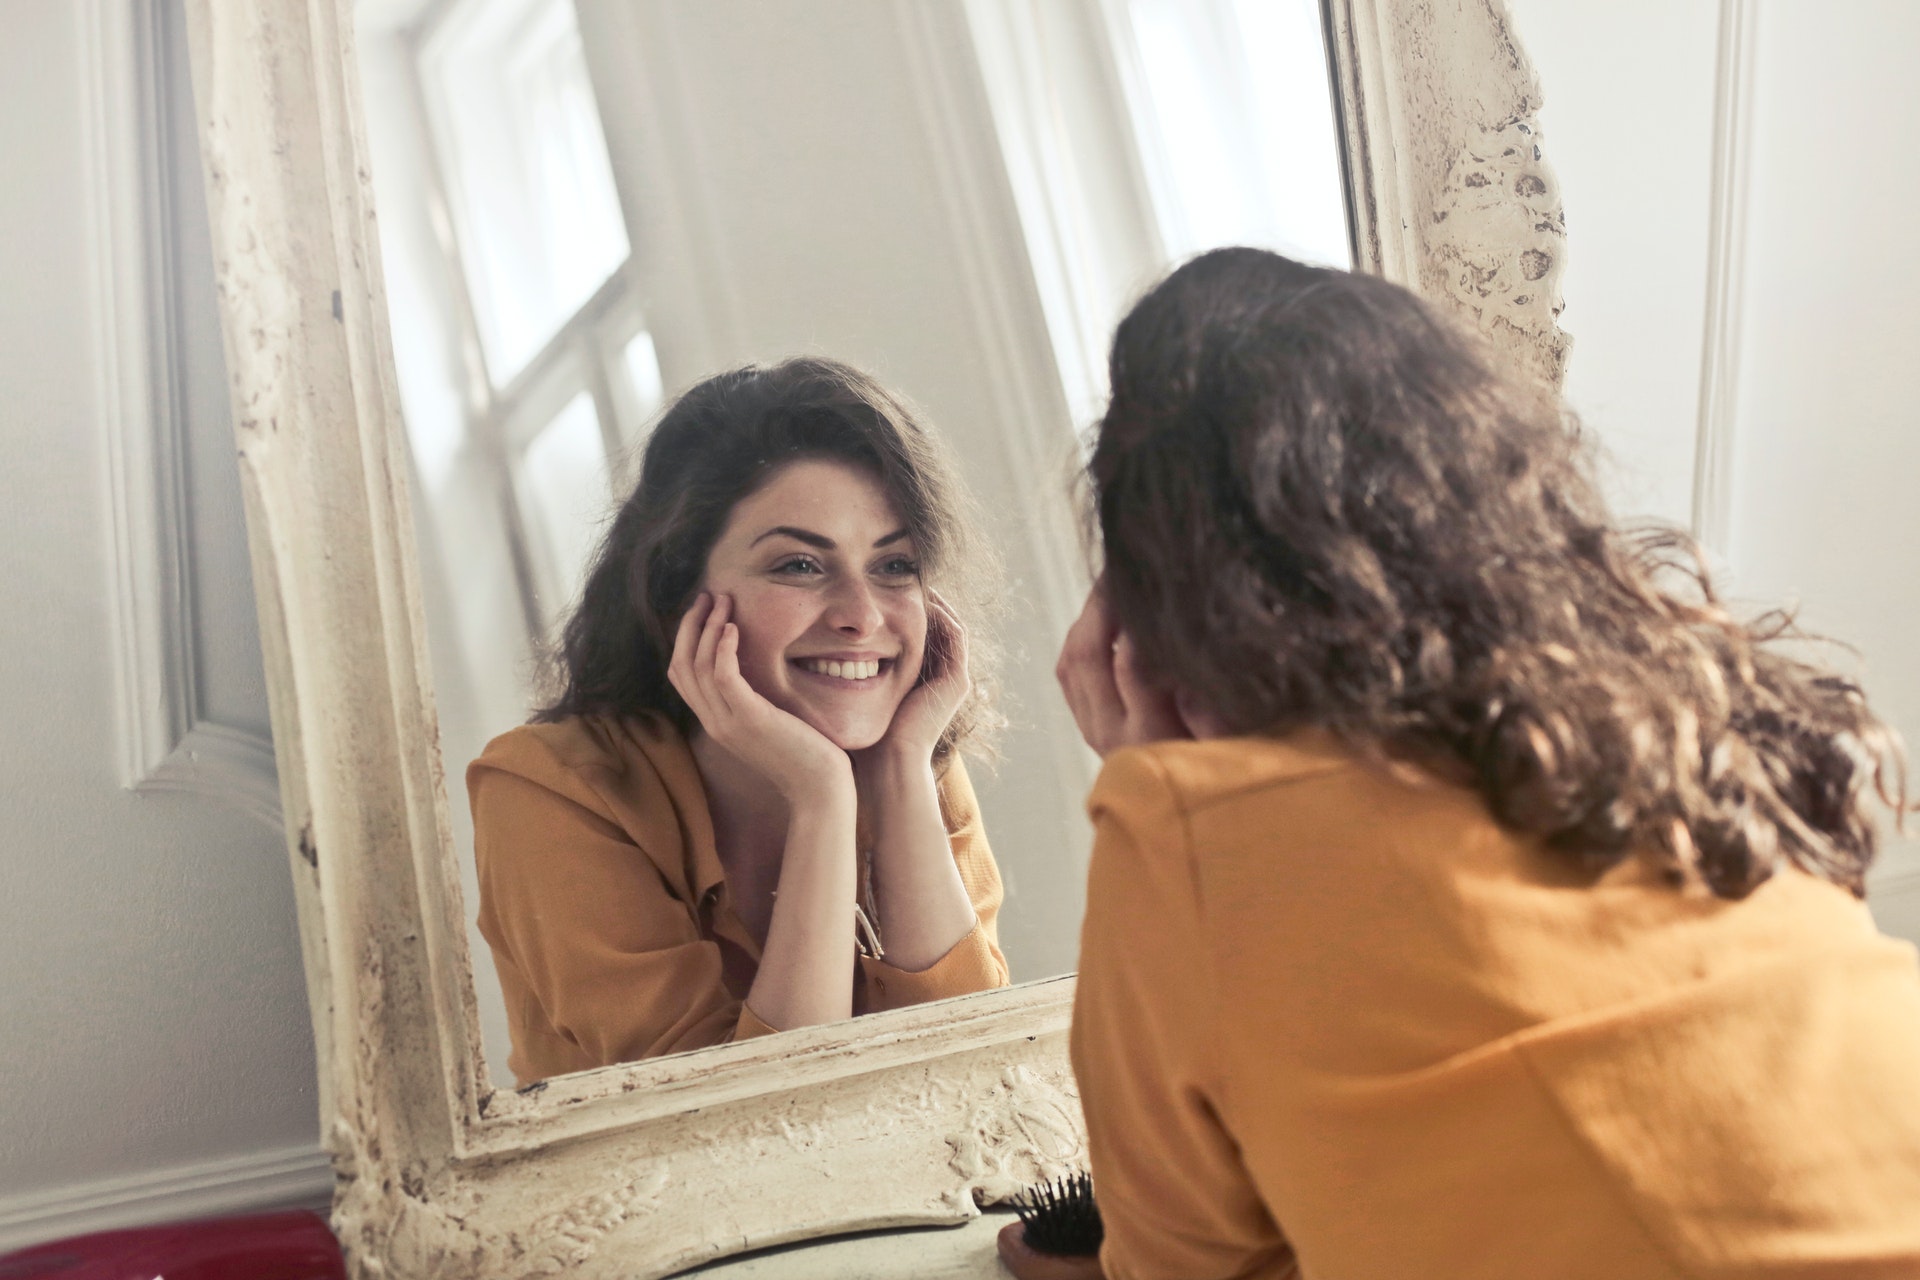 a woman is looking at herself in the mirror. She is smiling and her hands are cupping her face.